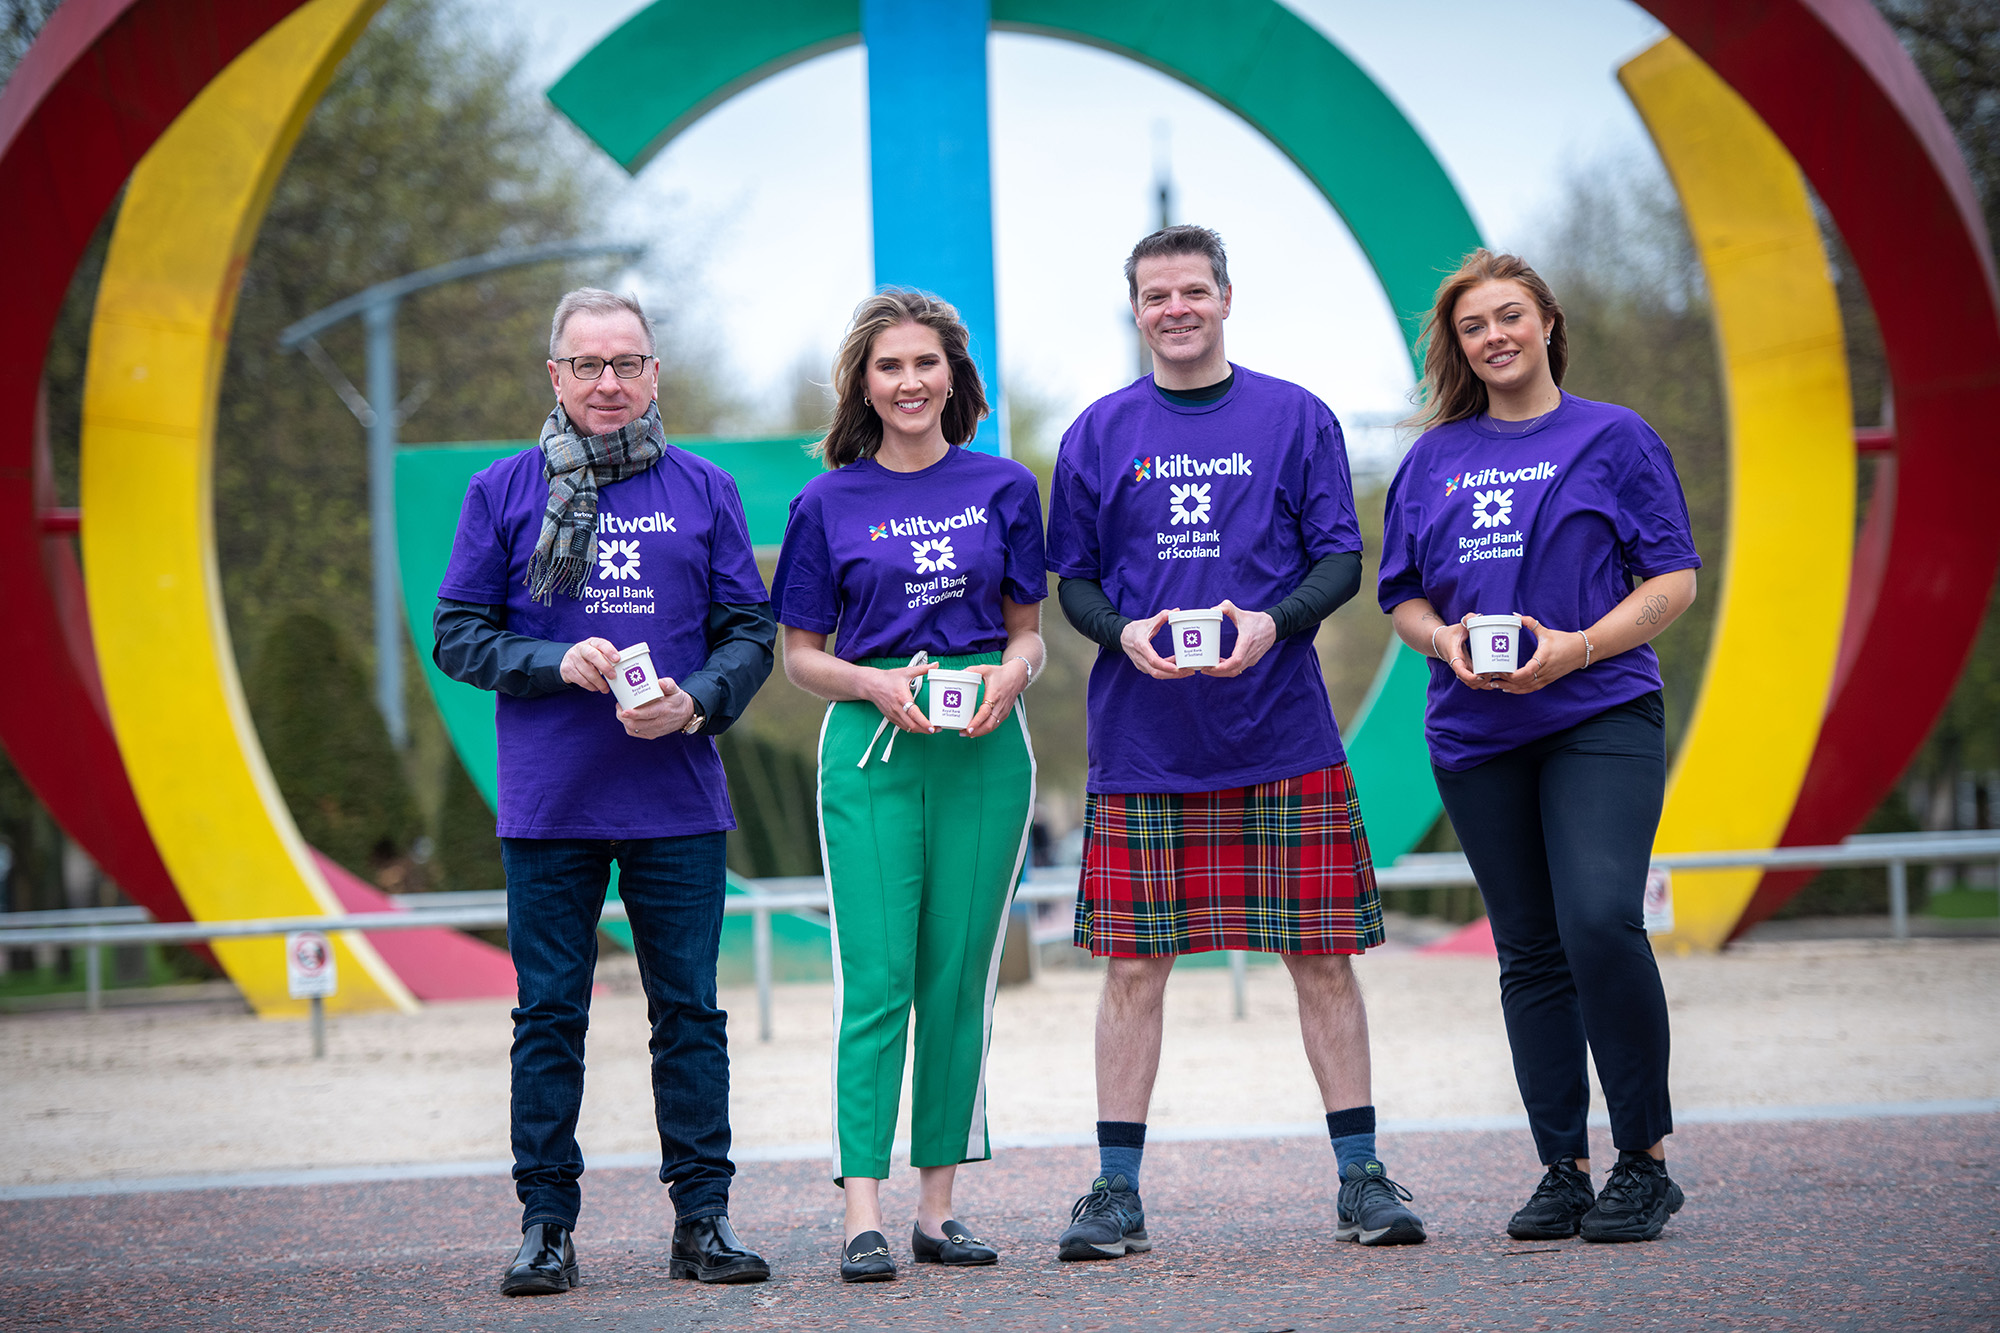 Royal Bank of Scotland to partner with Kiltwalk for another two years